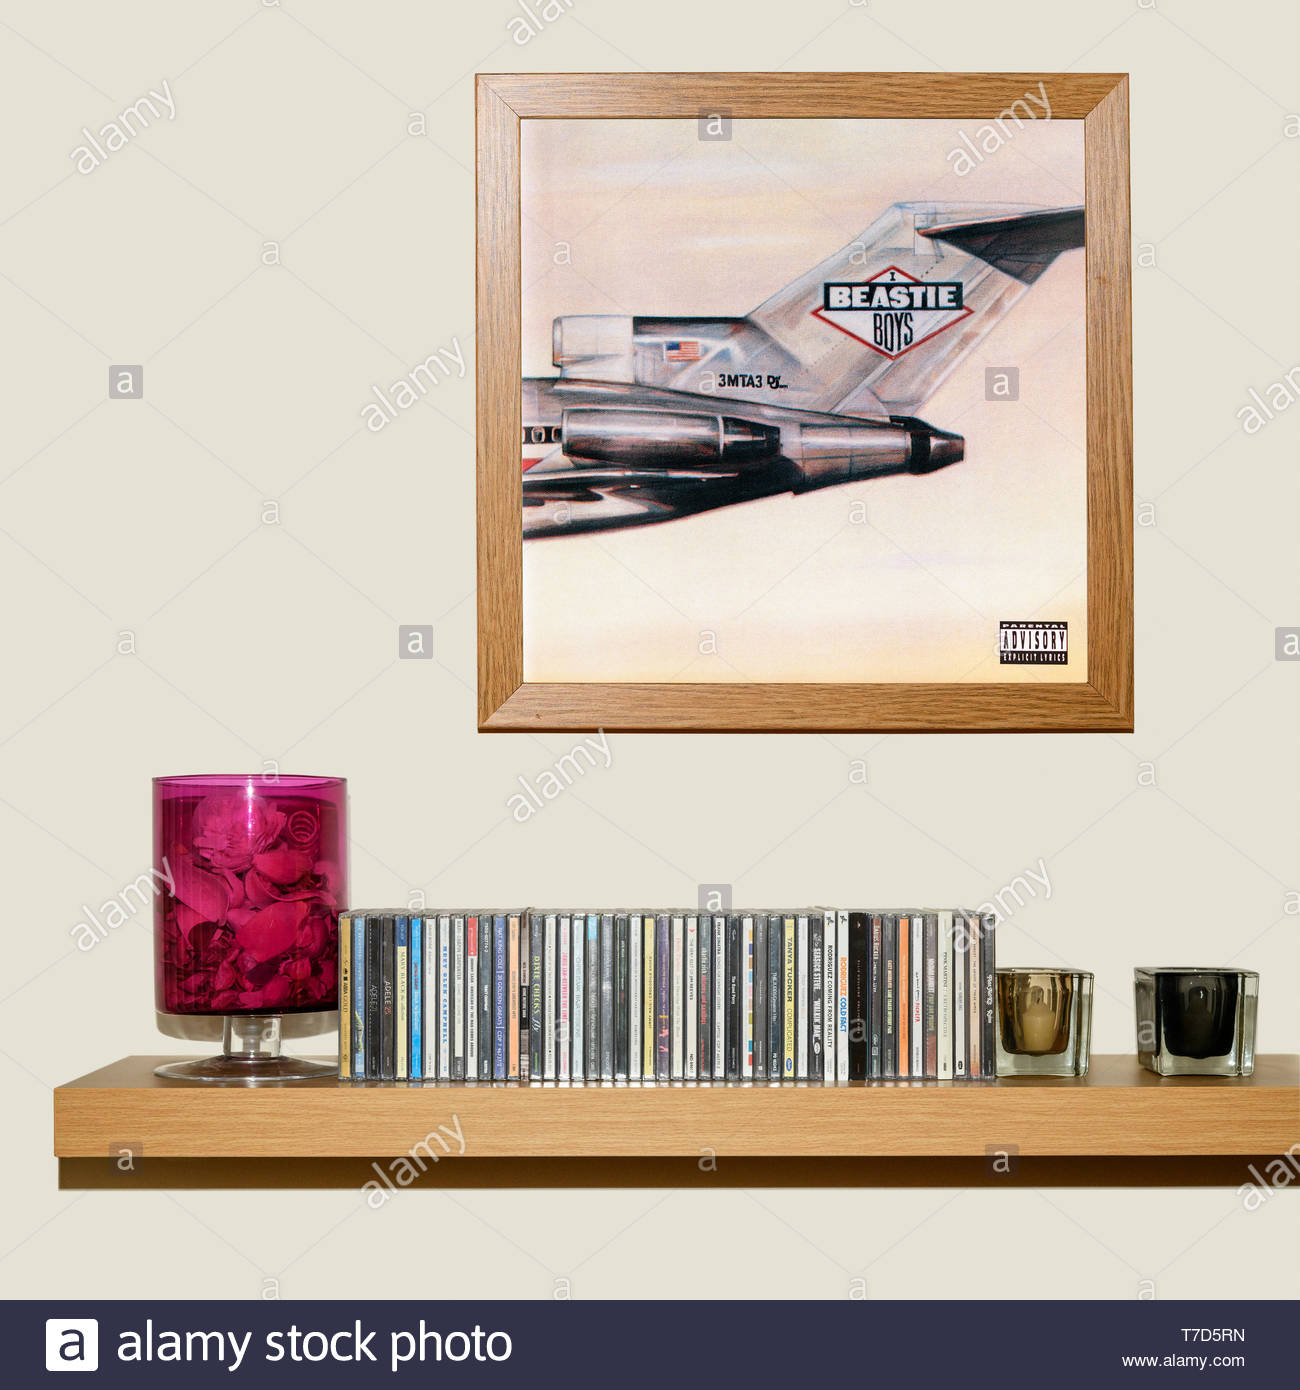 The Beastie Boys Licensed Yo Ill Debut Album Cd Collection And Framed Album Cover England Stock Photo Alamy